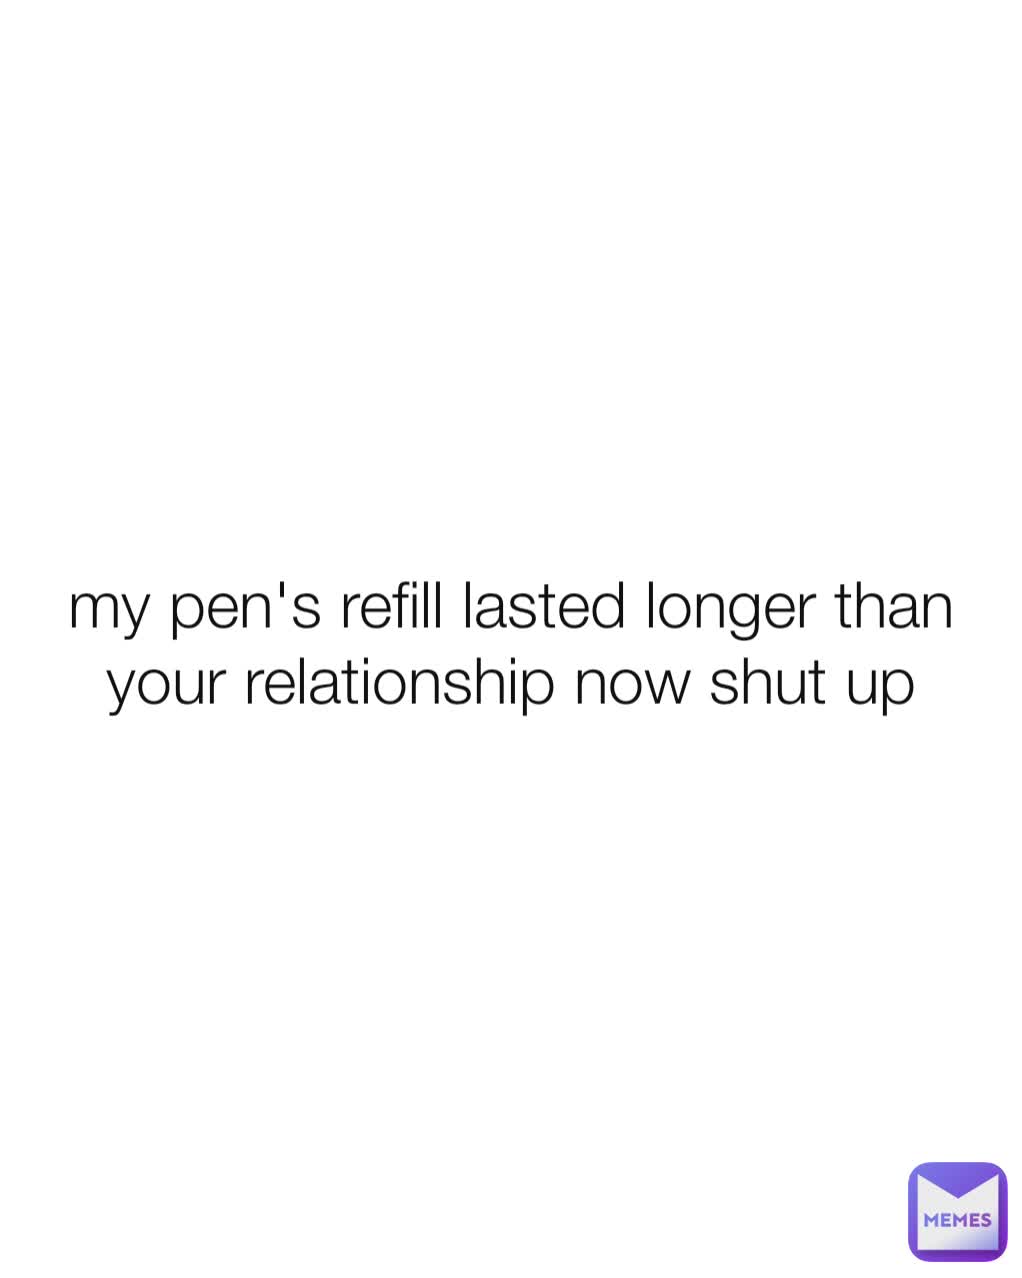 my pen's refill lasted longer than your relationship now shut up